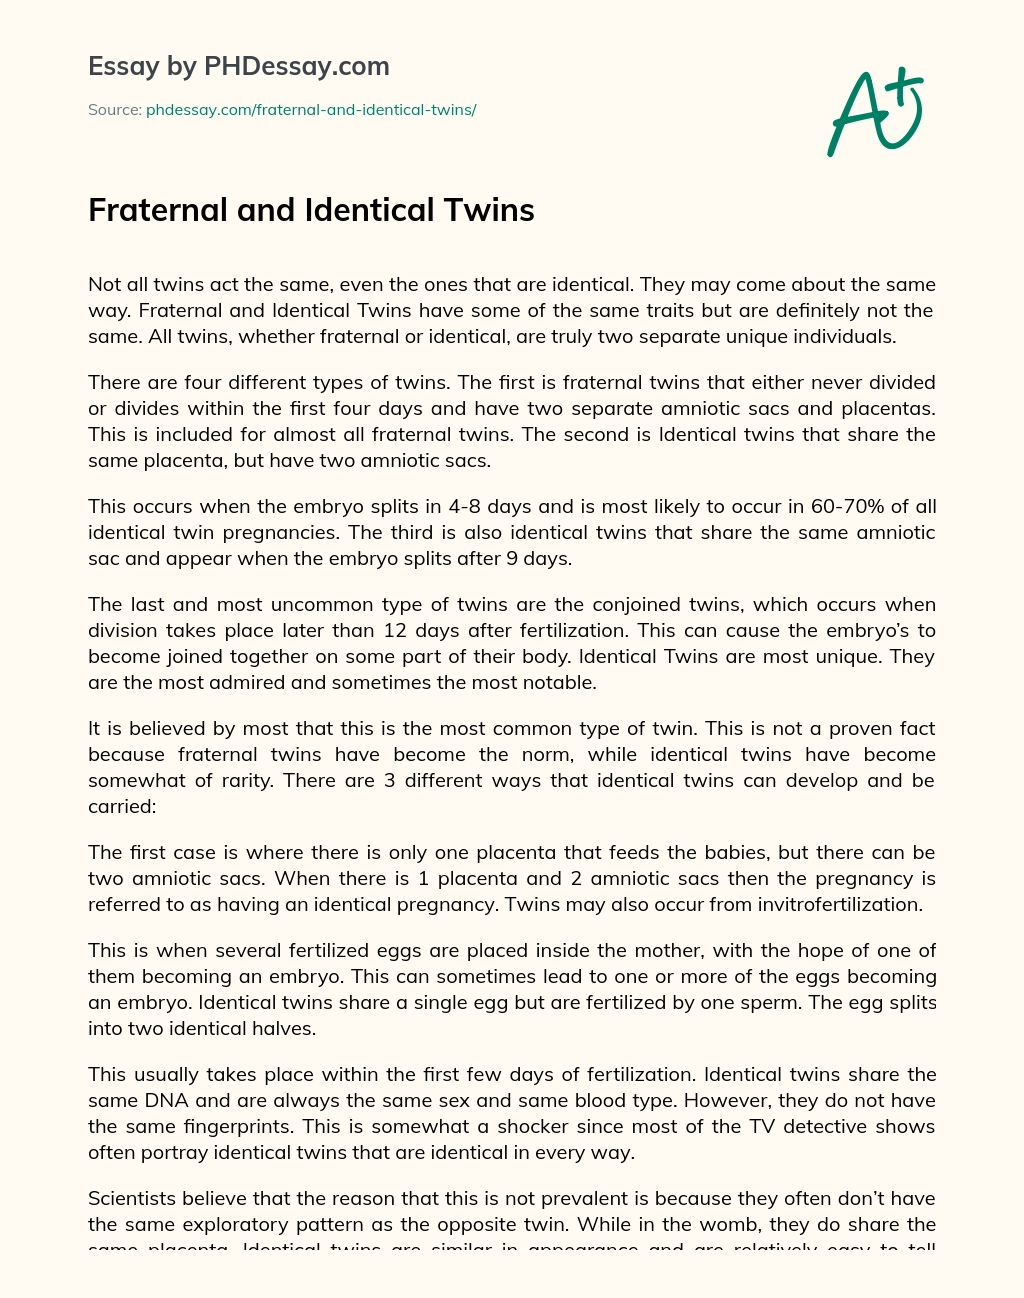 Fraternal and Identical Twins essay